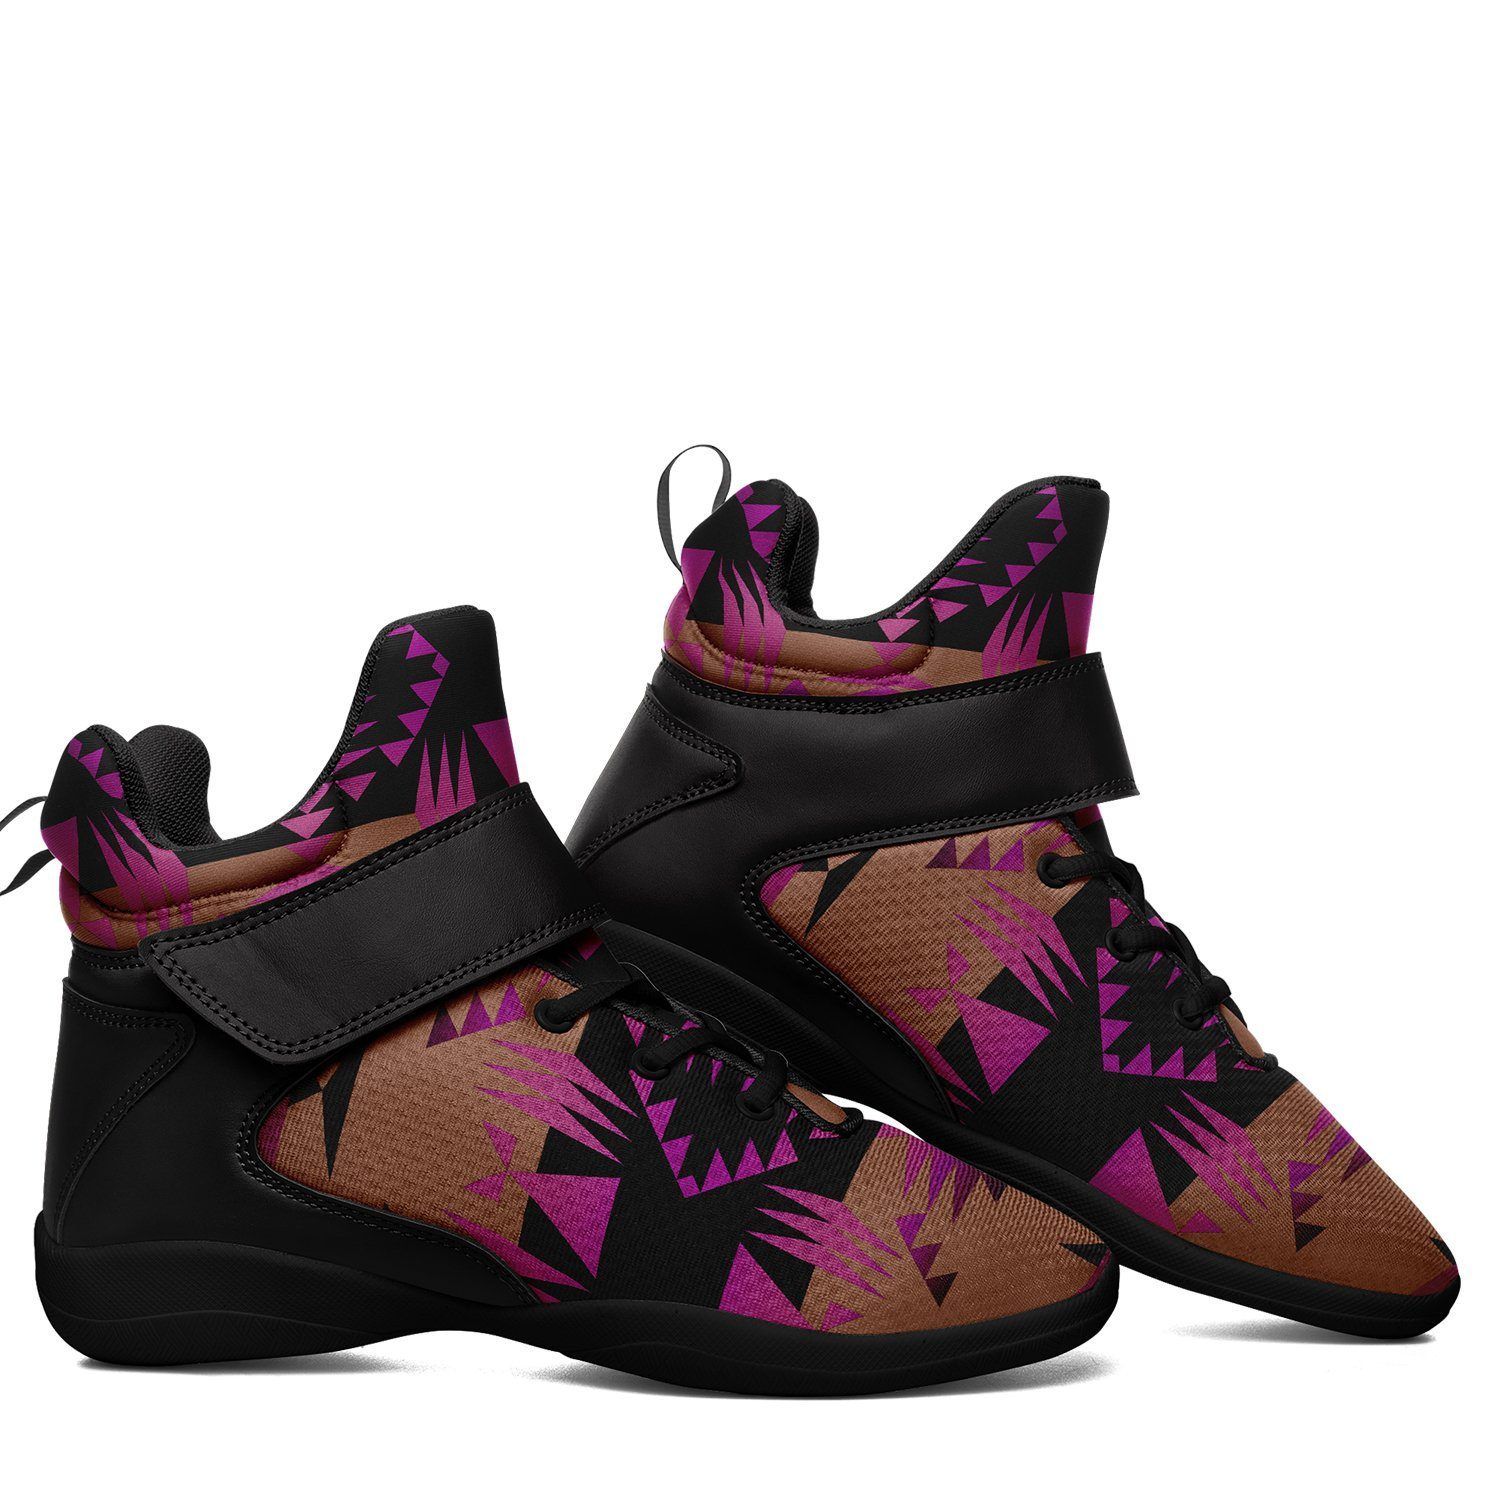 Between the Mountains Berry Kid's Ipottaa Basketball / Sport High Top Shoes 49 Dzine 